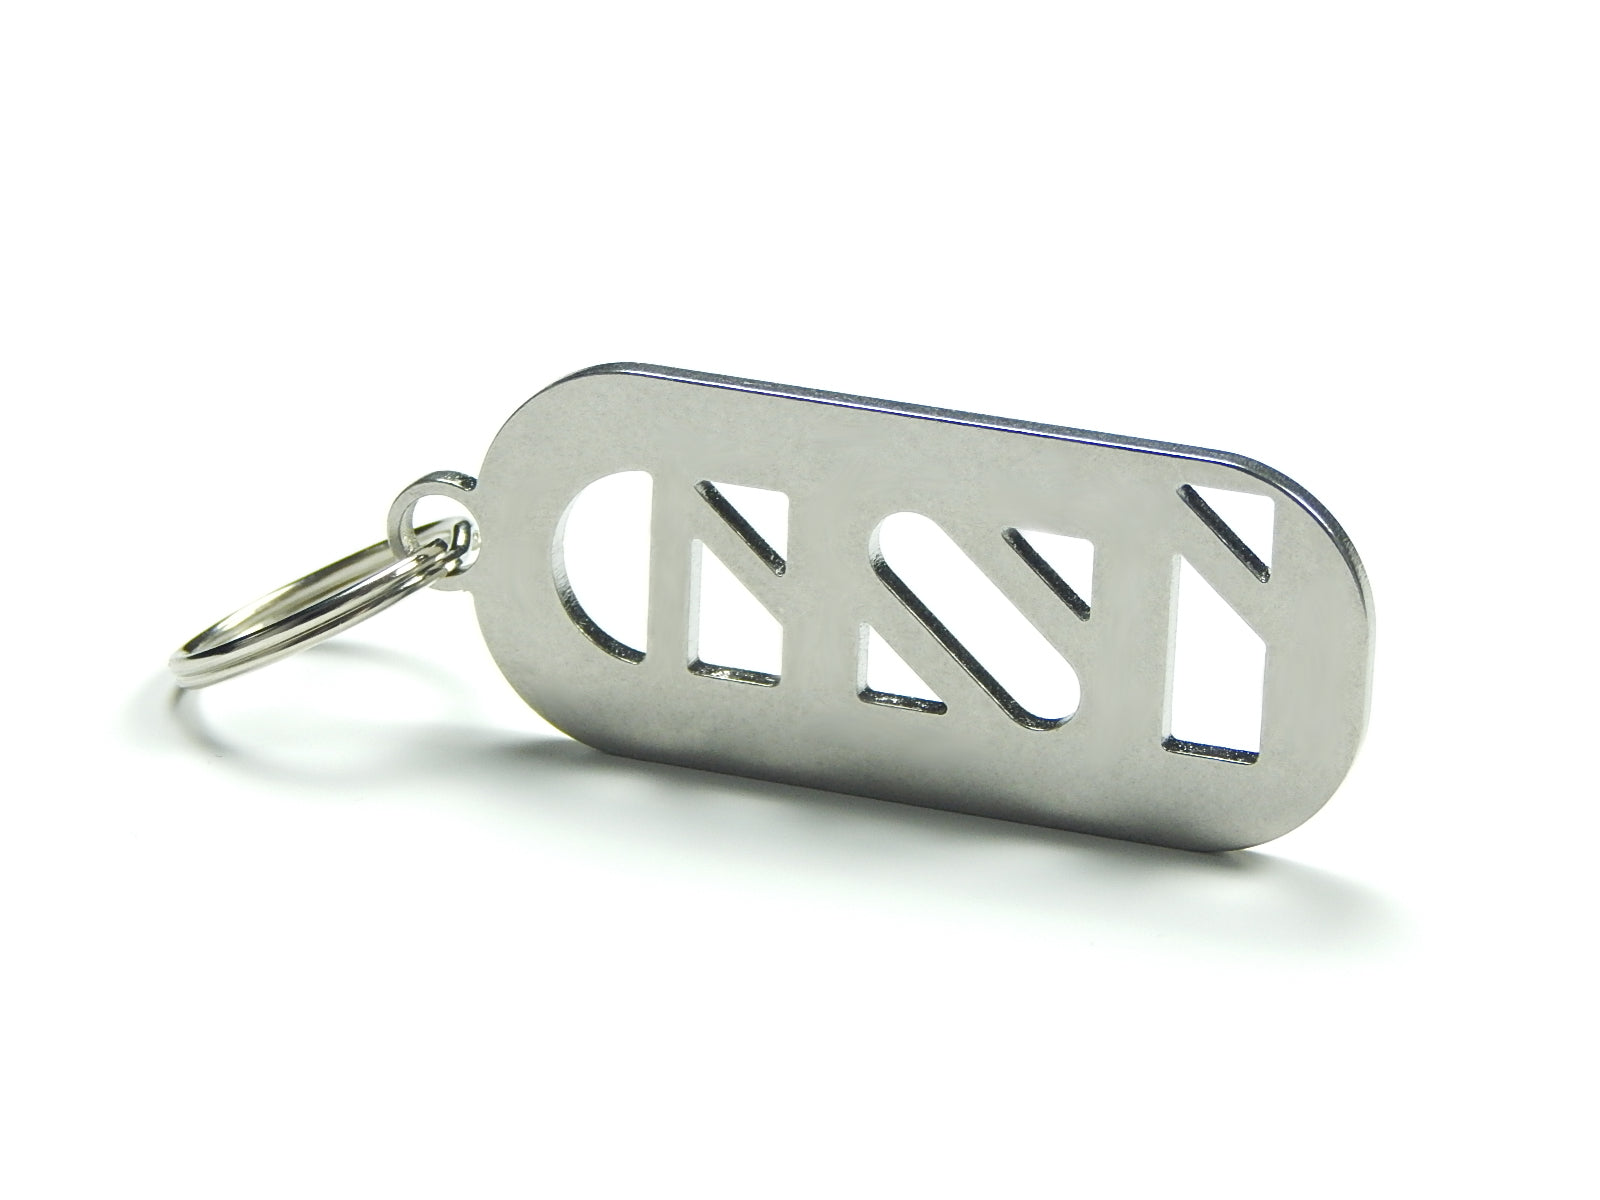 C20XE Opel Keychain Stainless Steel brushed – DisagrEE